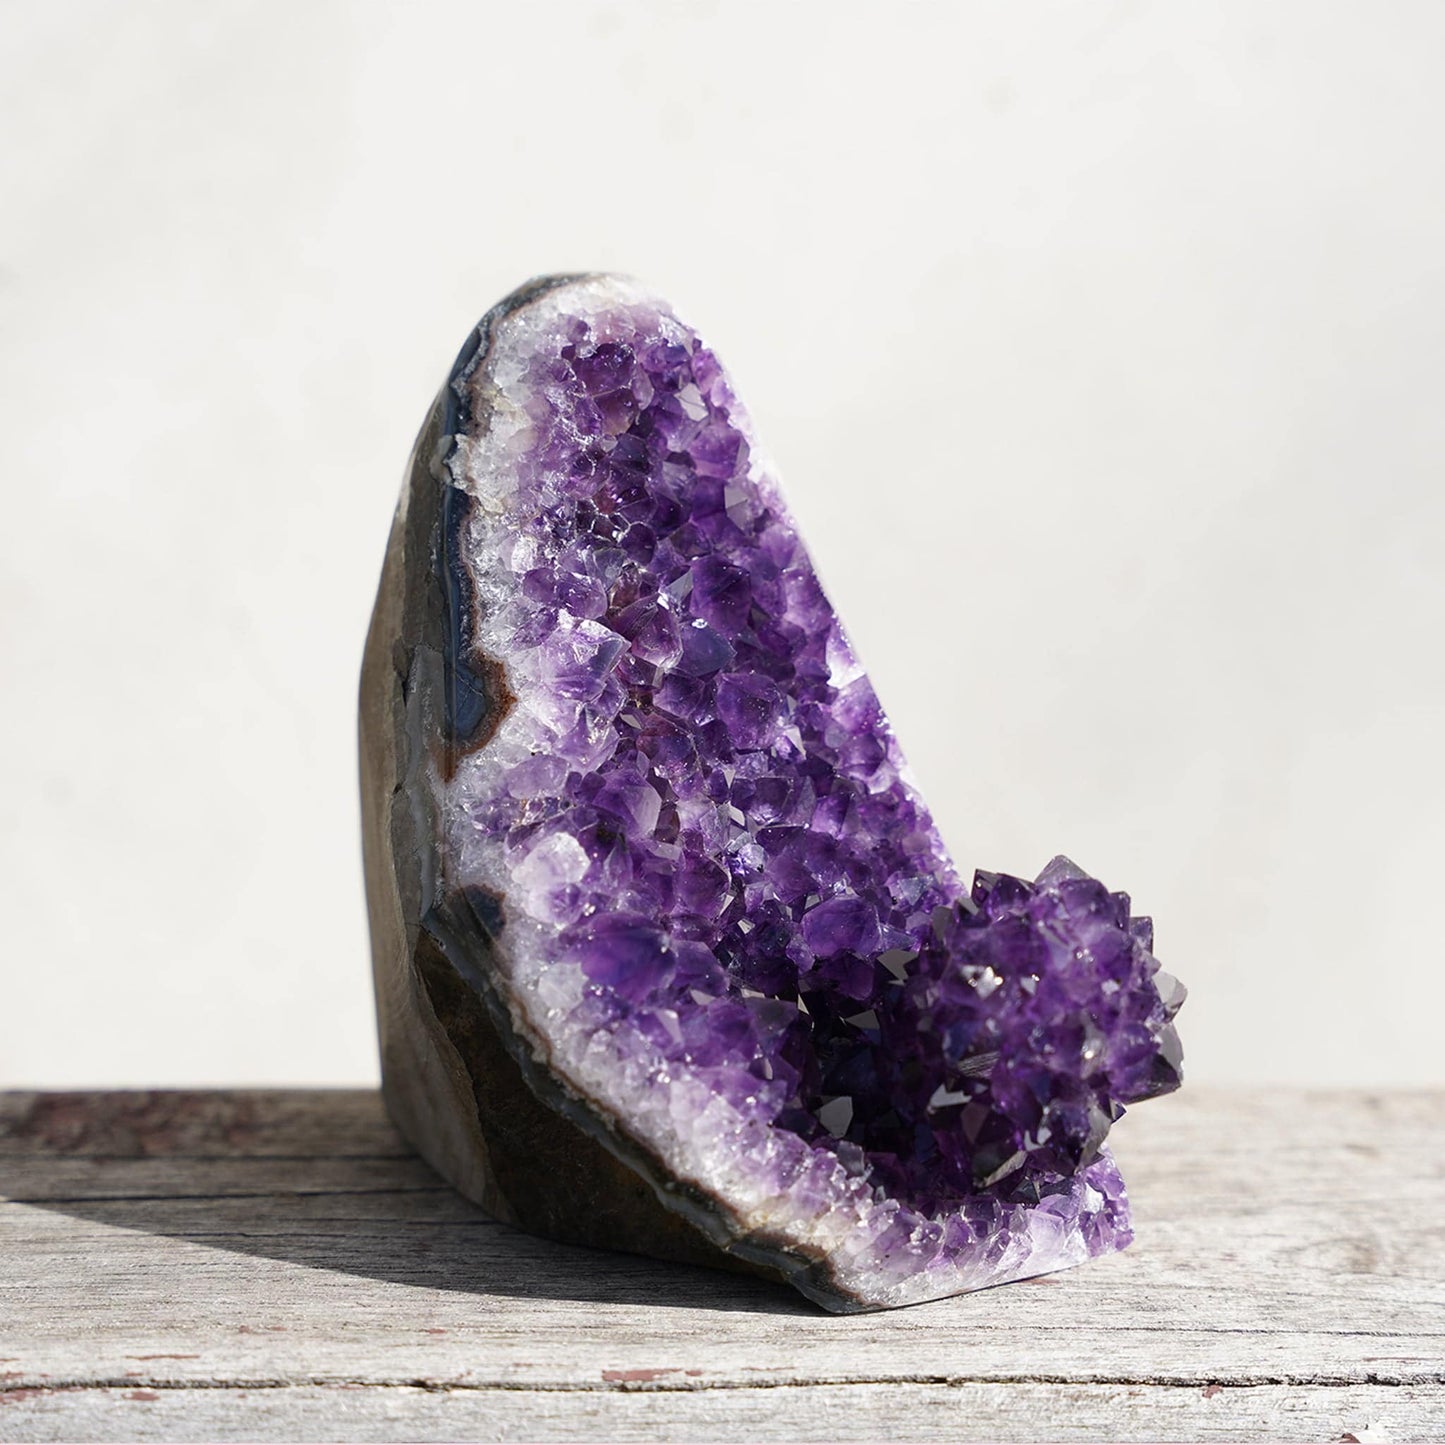 Stunning eye-catching natural formation on this gorgeous cut-base geode amethyst.  Bands of layered minerals including white quartz, blue agate, and green celadonite separate the raw basalt rock in the back from the glimmering front of deep purple crystal peaks.